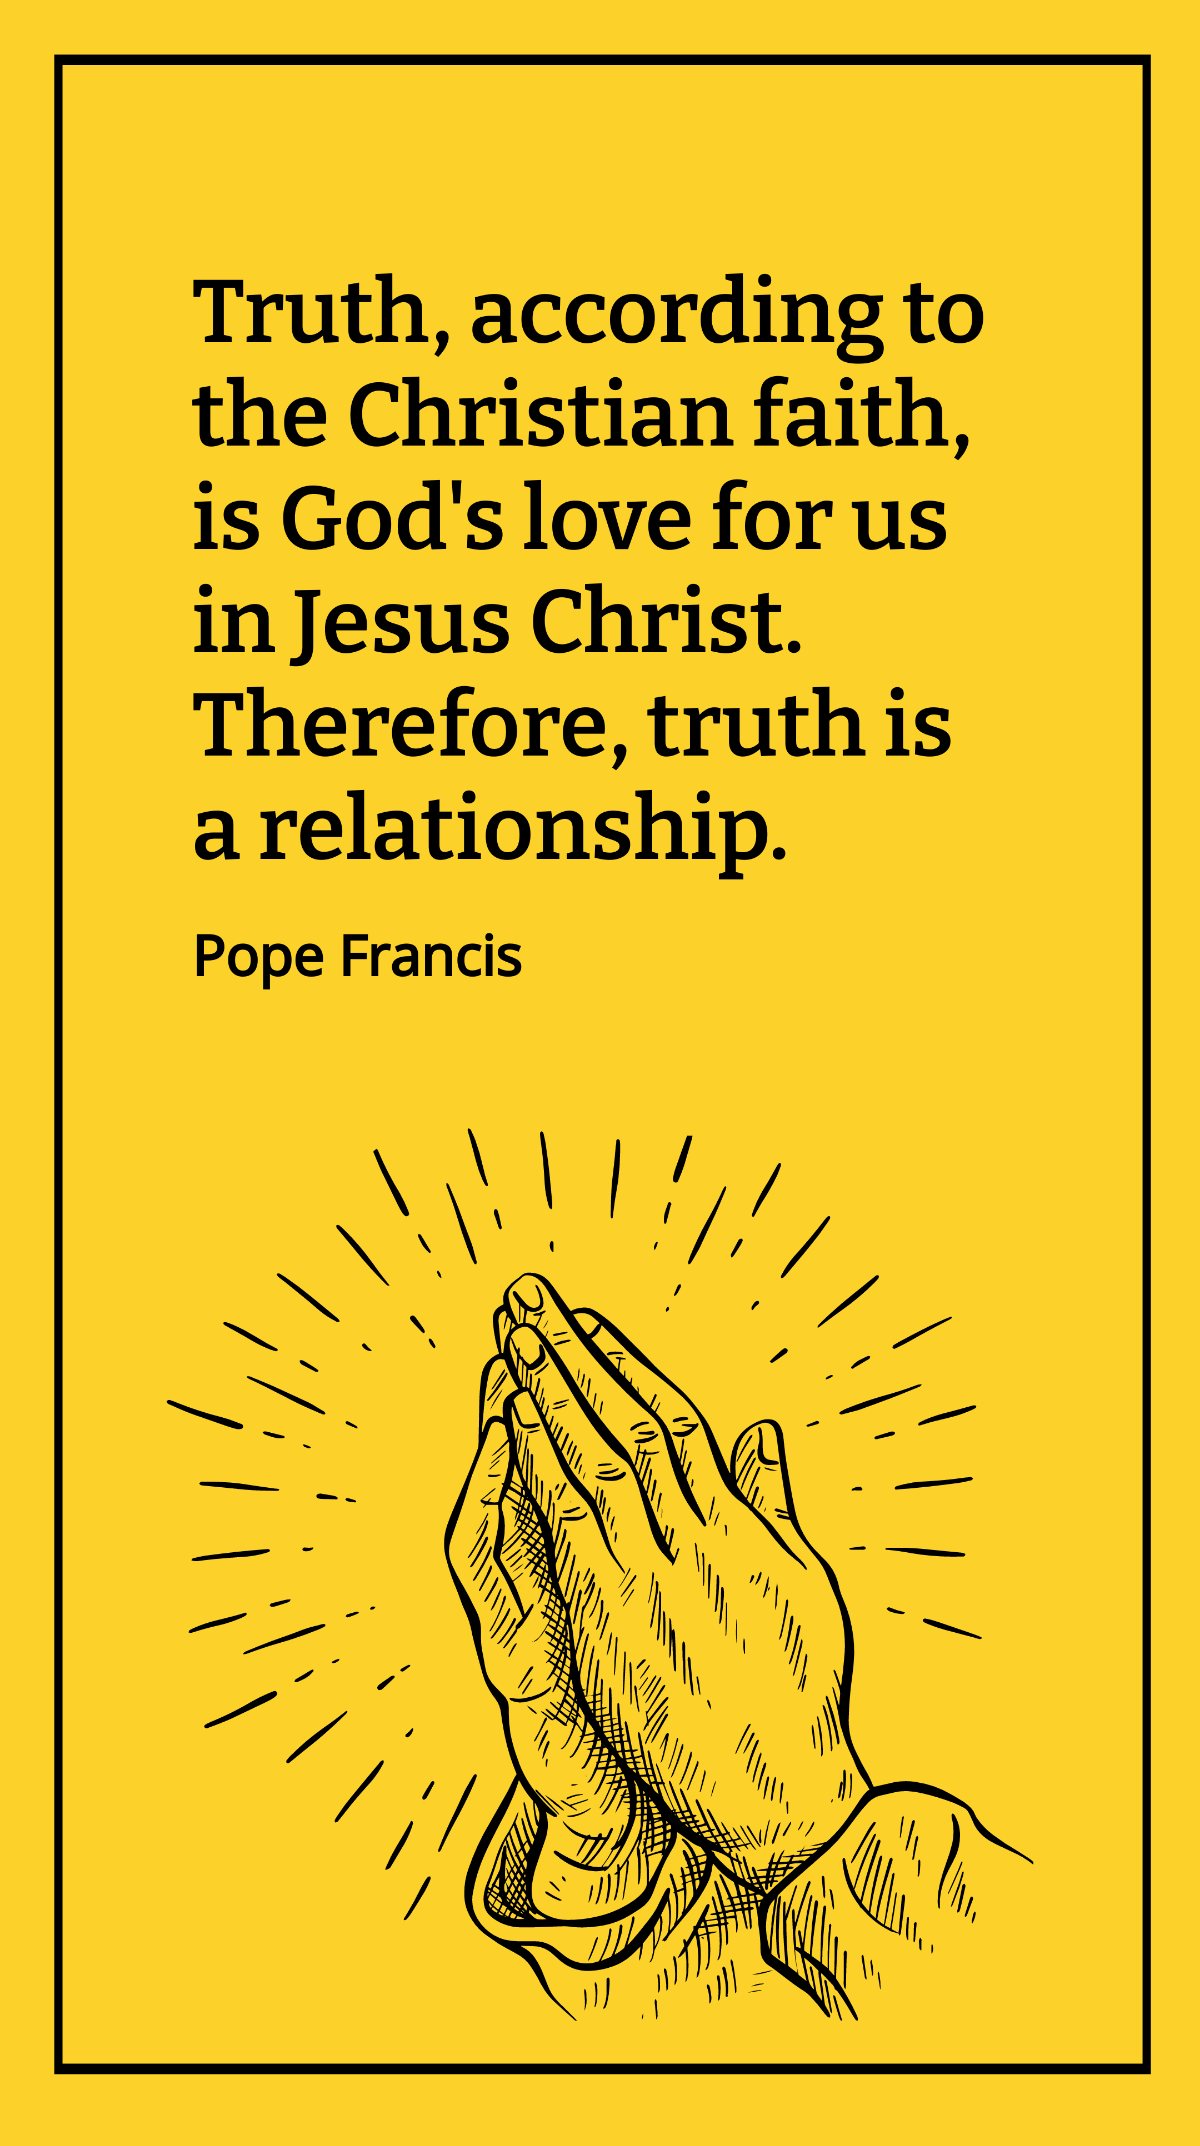 Pope Francis - Truth, according to the Christian faith, is God's love for us in Jesus Christ. Therefore, truth is a relationship. Template